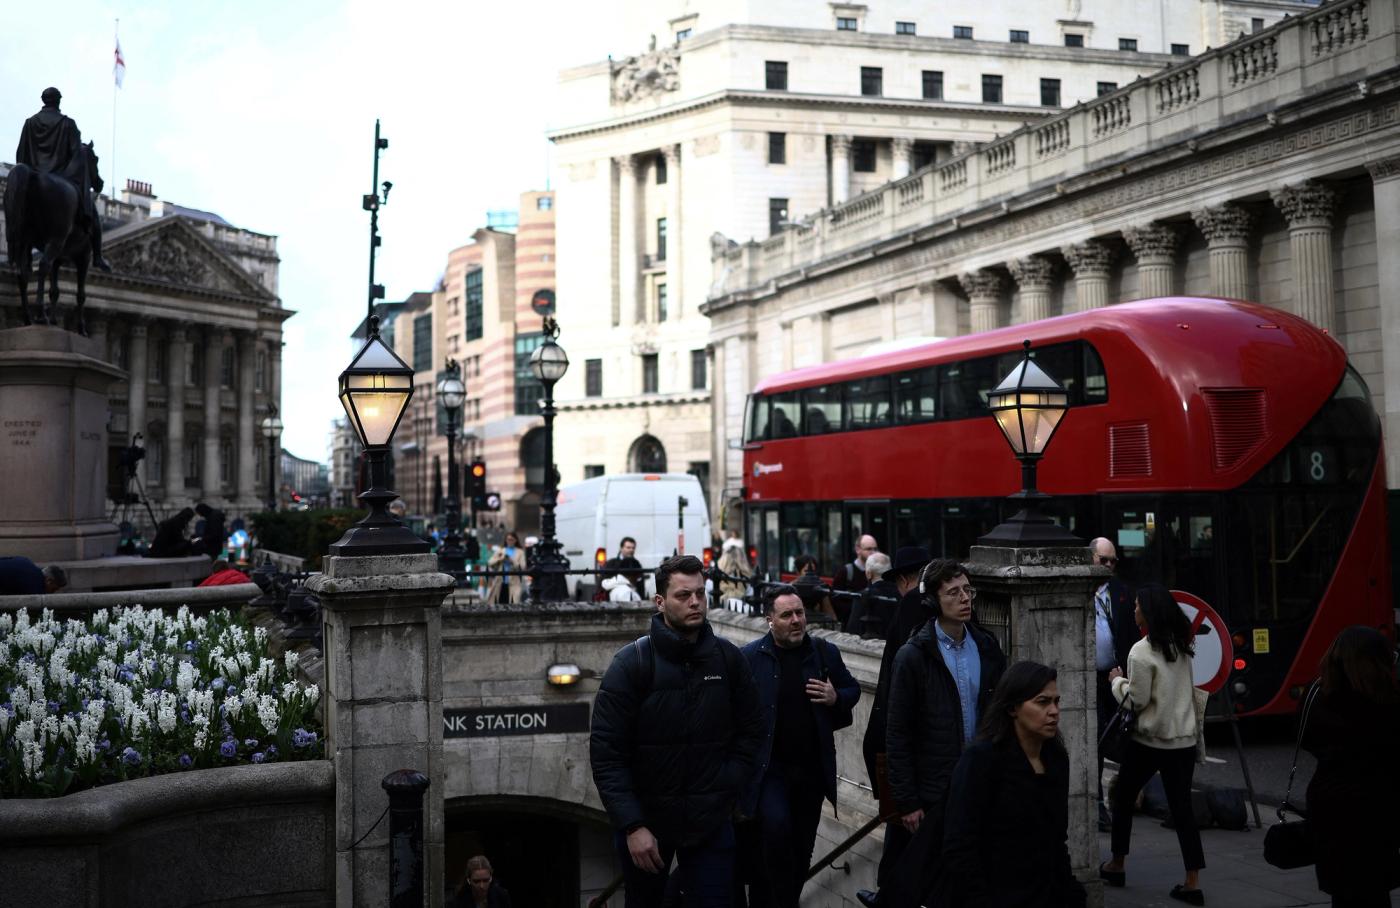 People exit an underground station outside the Bank of England in the City of London financial district in London, Britain, March 23, 2023. REUTERS/Henry Nicholls